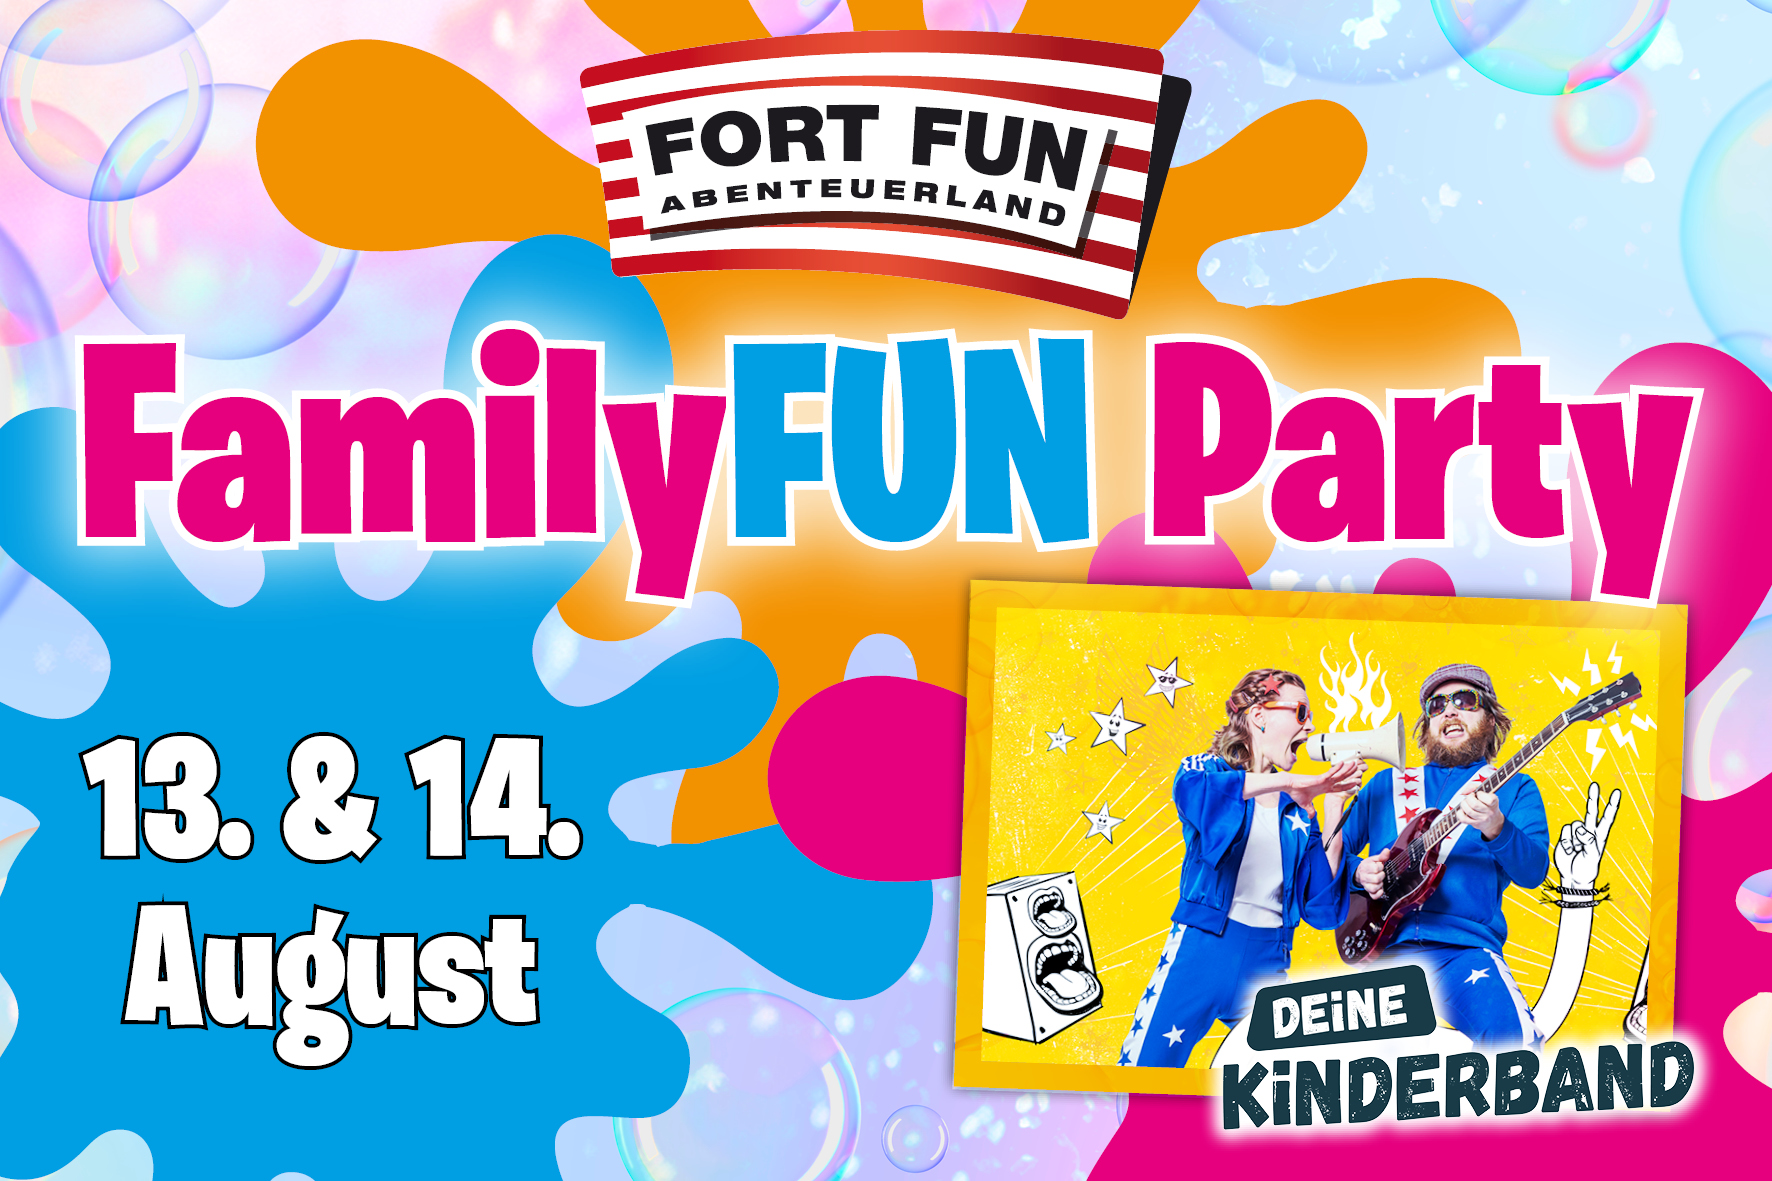 You are currently viewing FORT FUN FamilyFUN Party